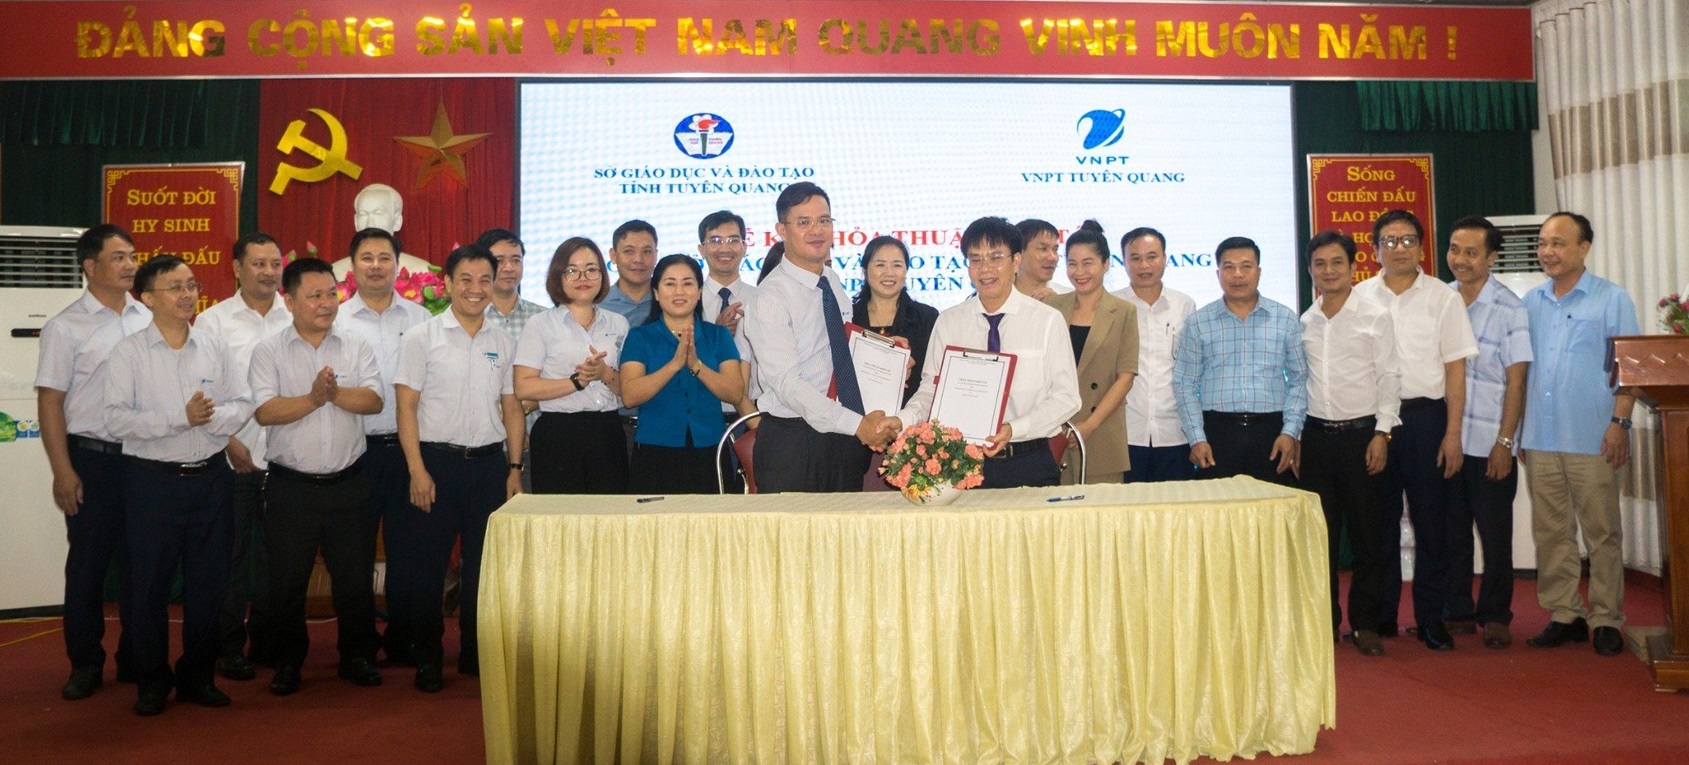 VNPT and Tuyen Quang Department of Education and Training sign cooperation agreement